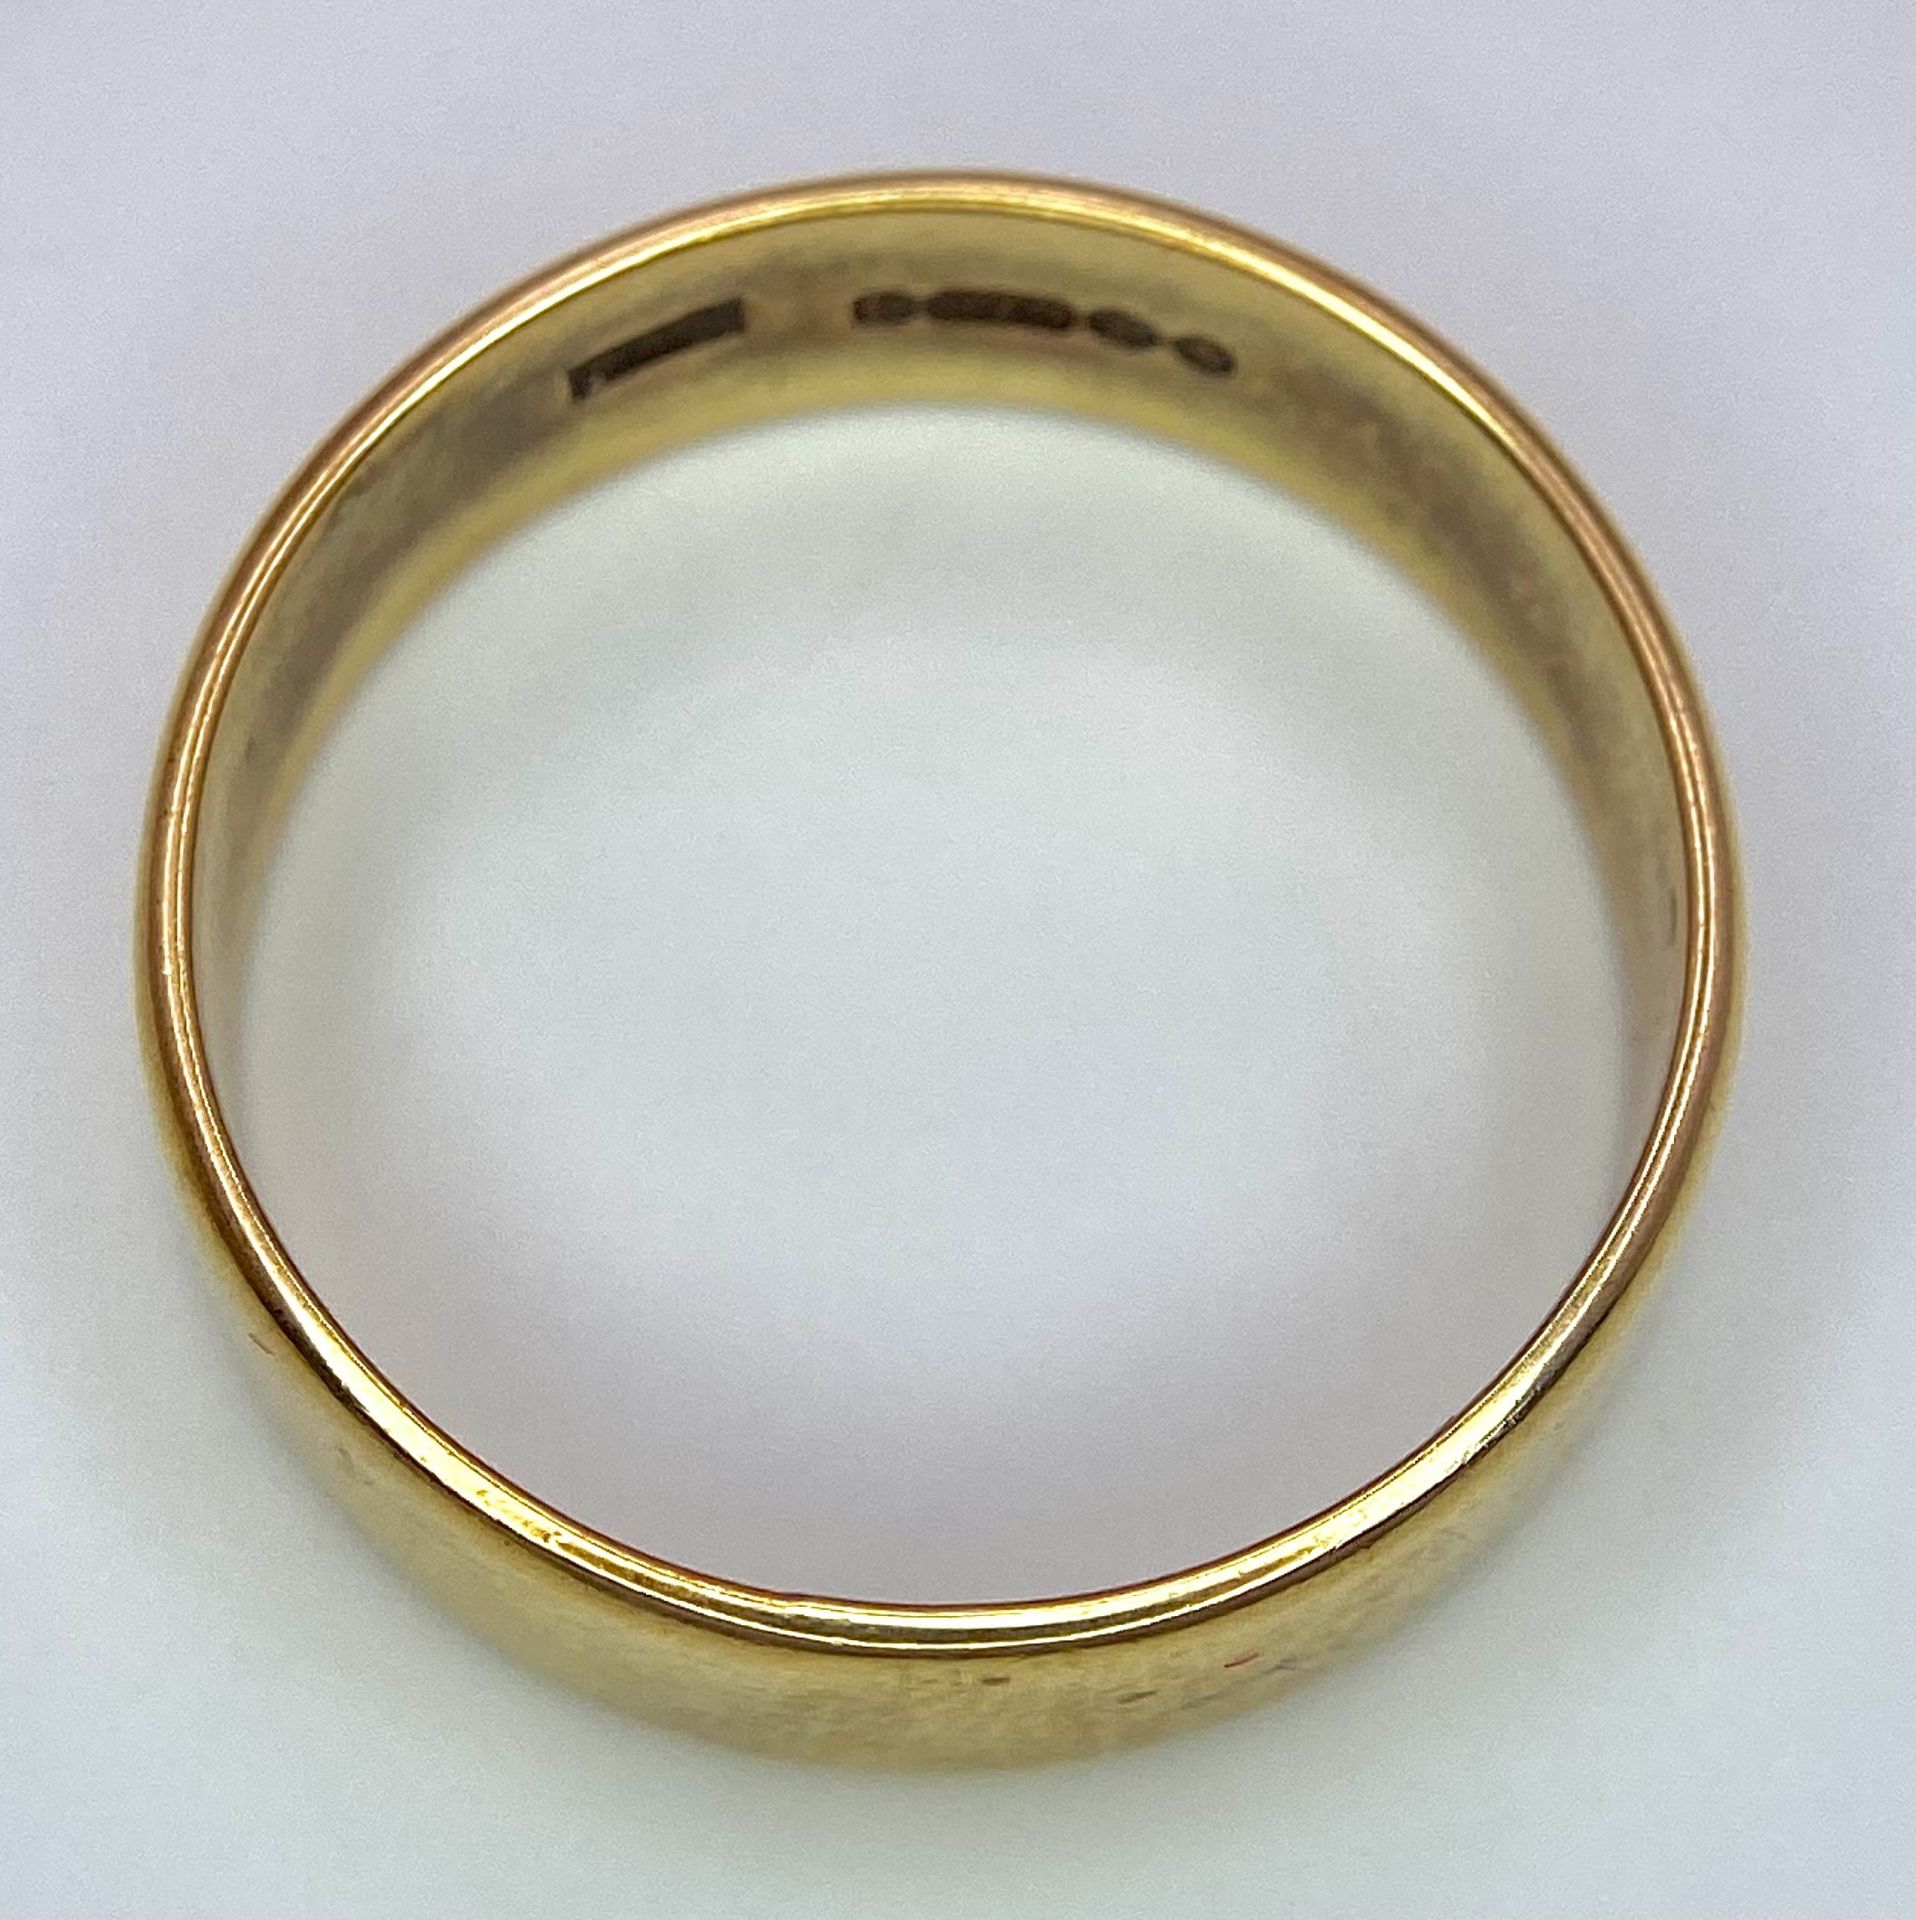 A Vintage 9K Yellow Gold Band Ring. 5mm width. 3.6g weight. Full UK hallmarks. - Image 4 of 6